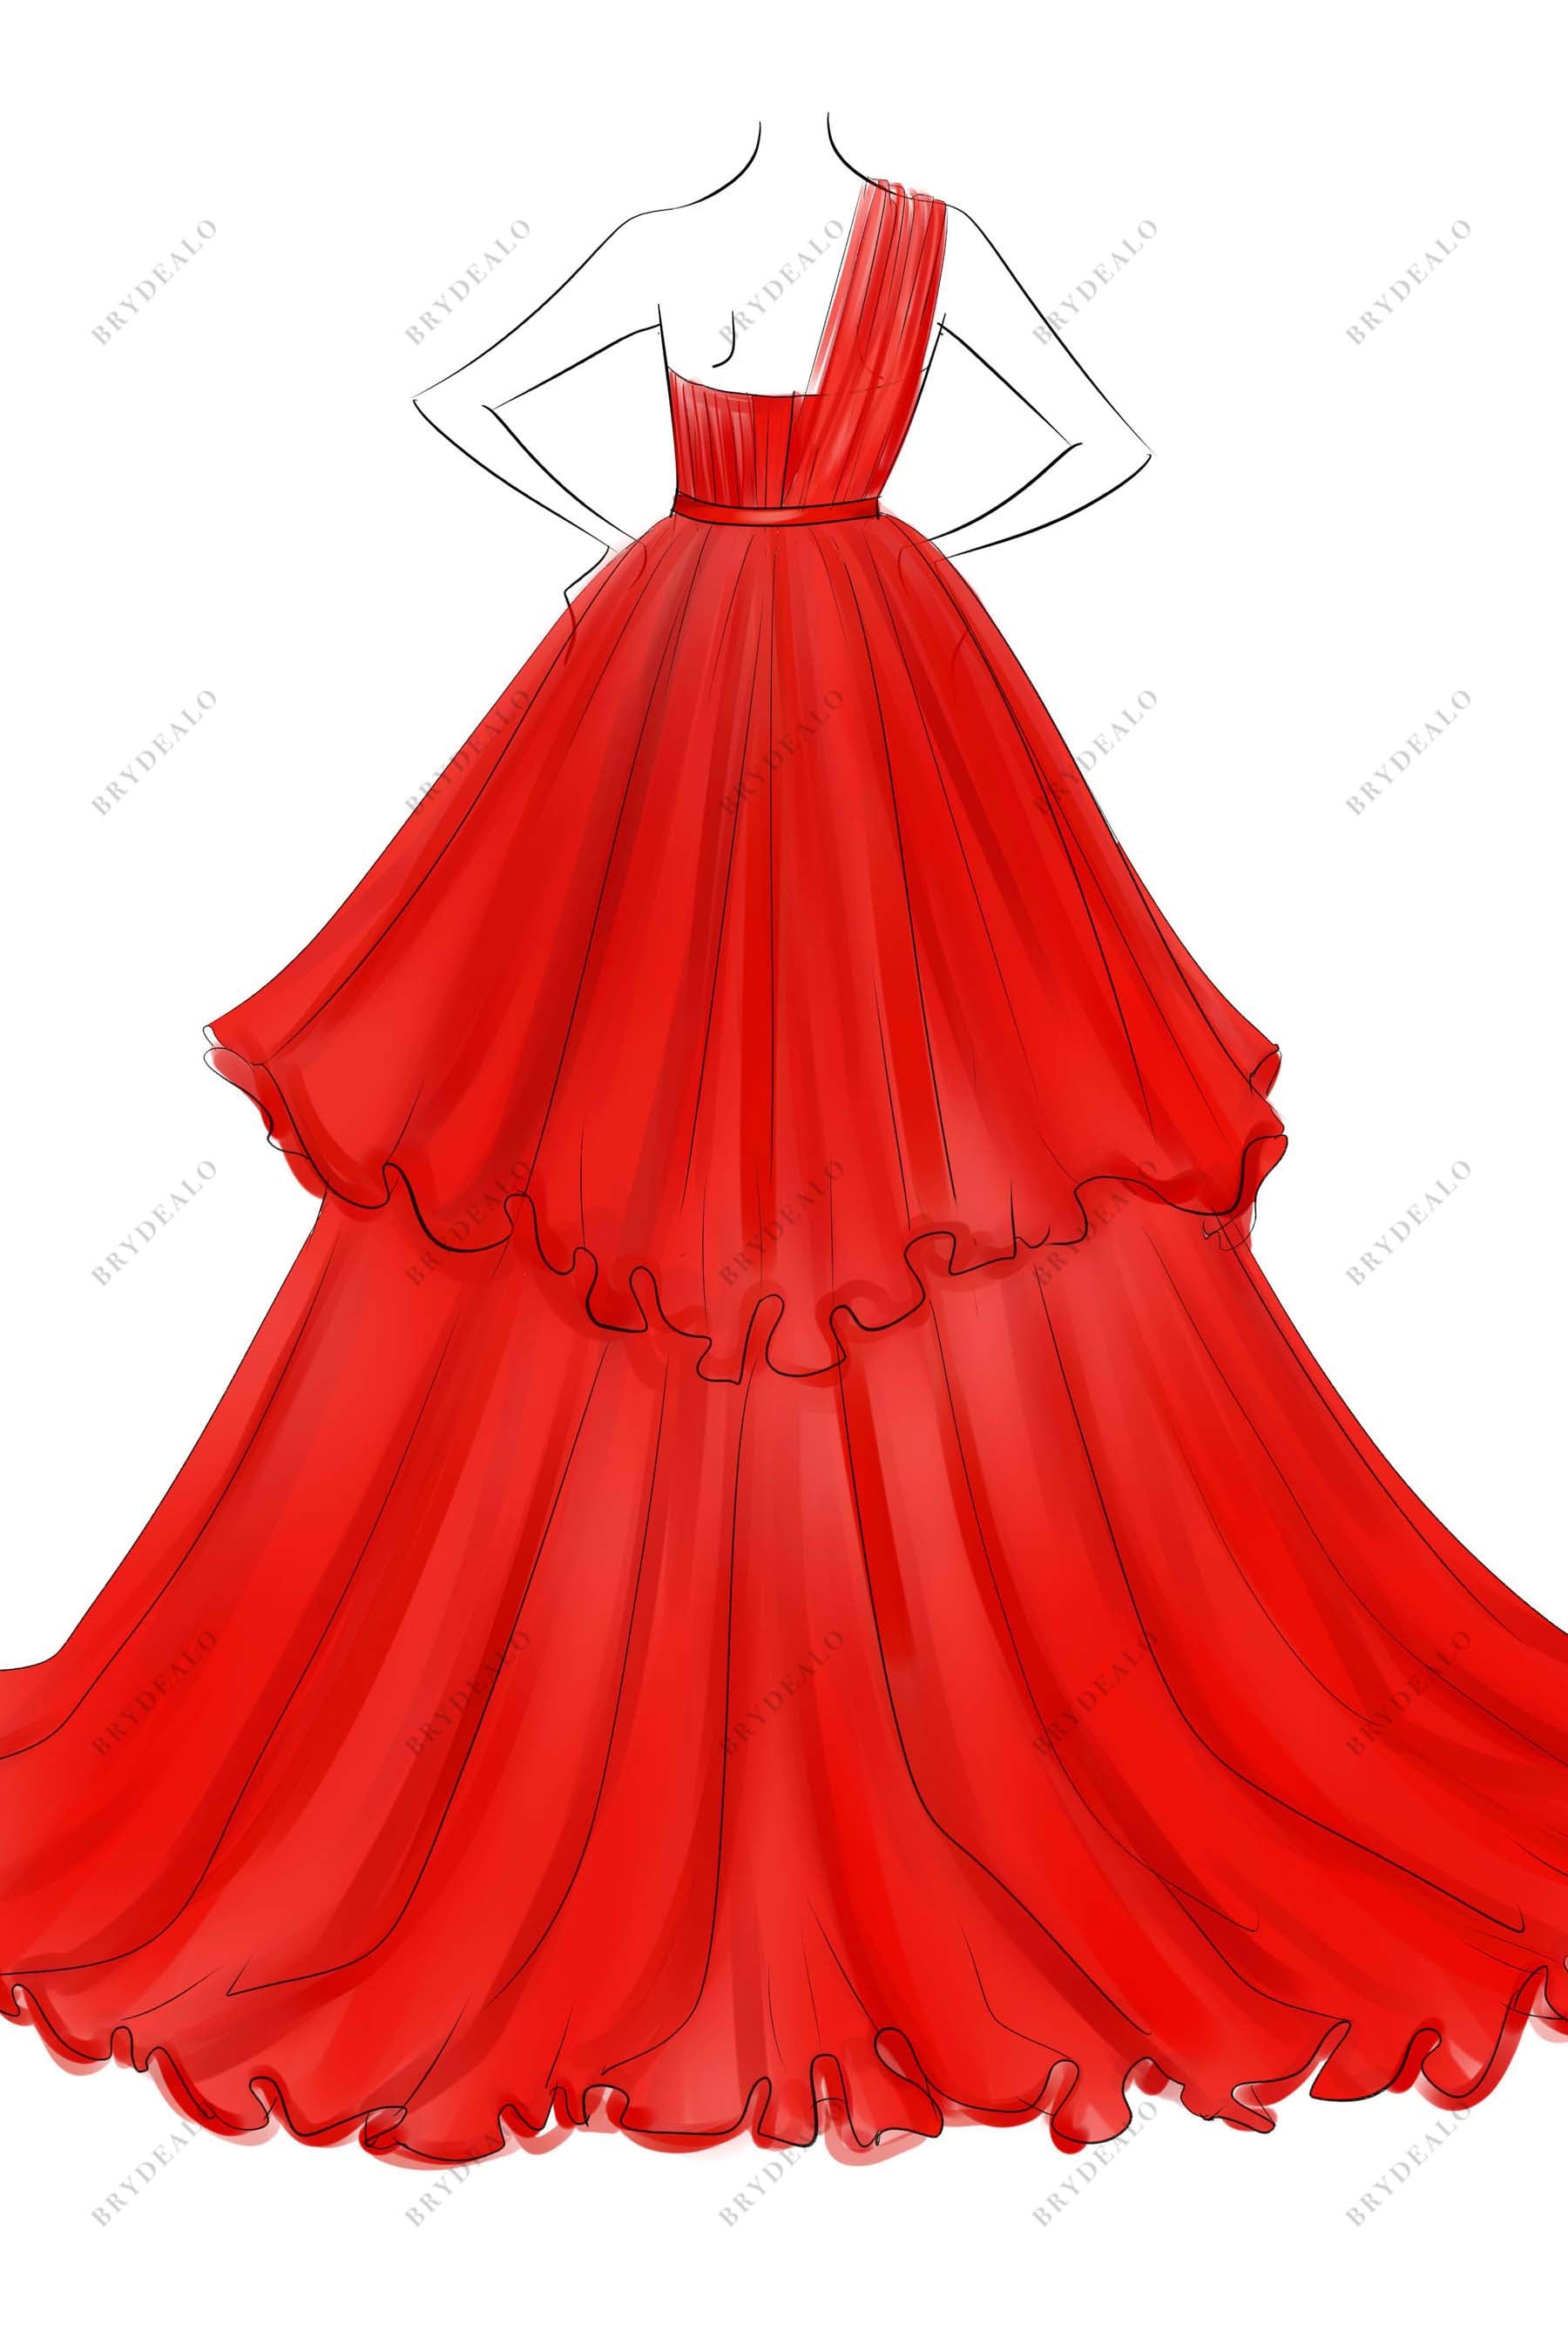 long train one shoulder prom ball gown sketch